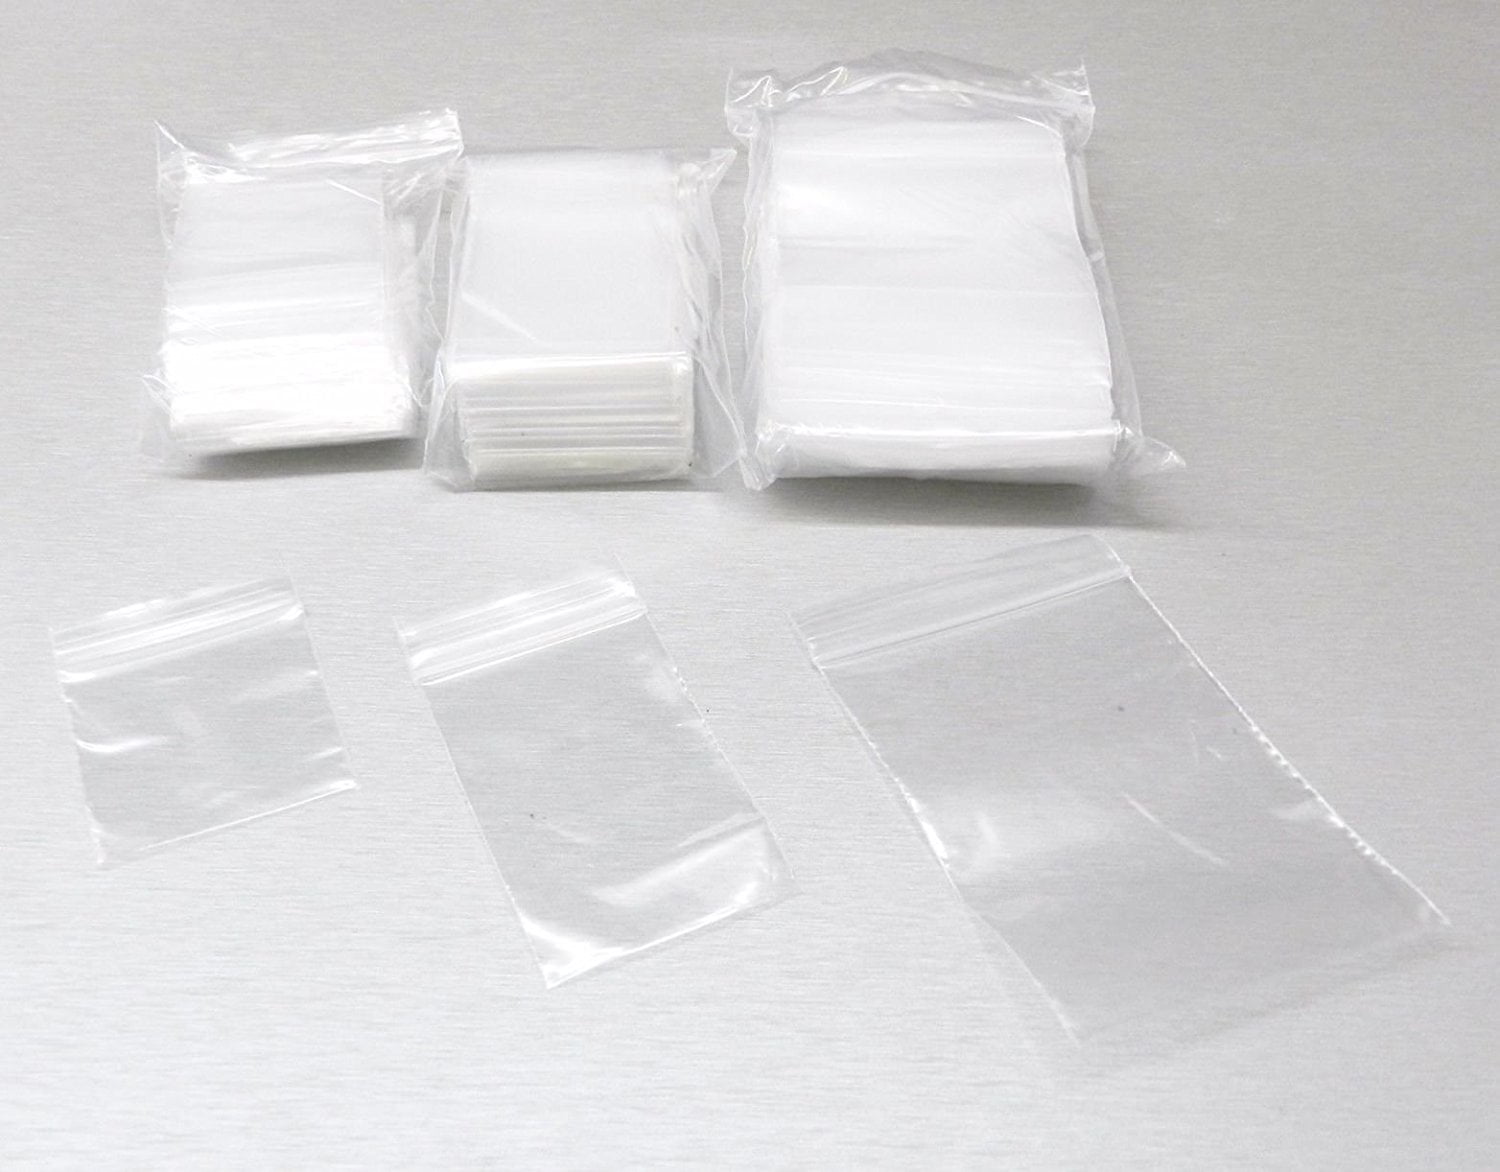 300 3x4 Reclosable Resealable Clear Zipper Plastic Bags 2Mil 3"x4" inch 